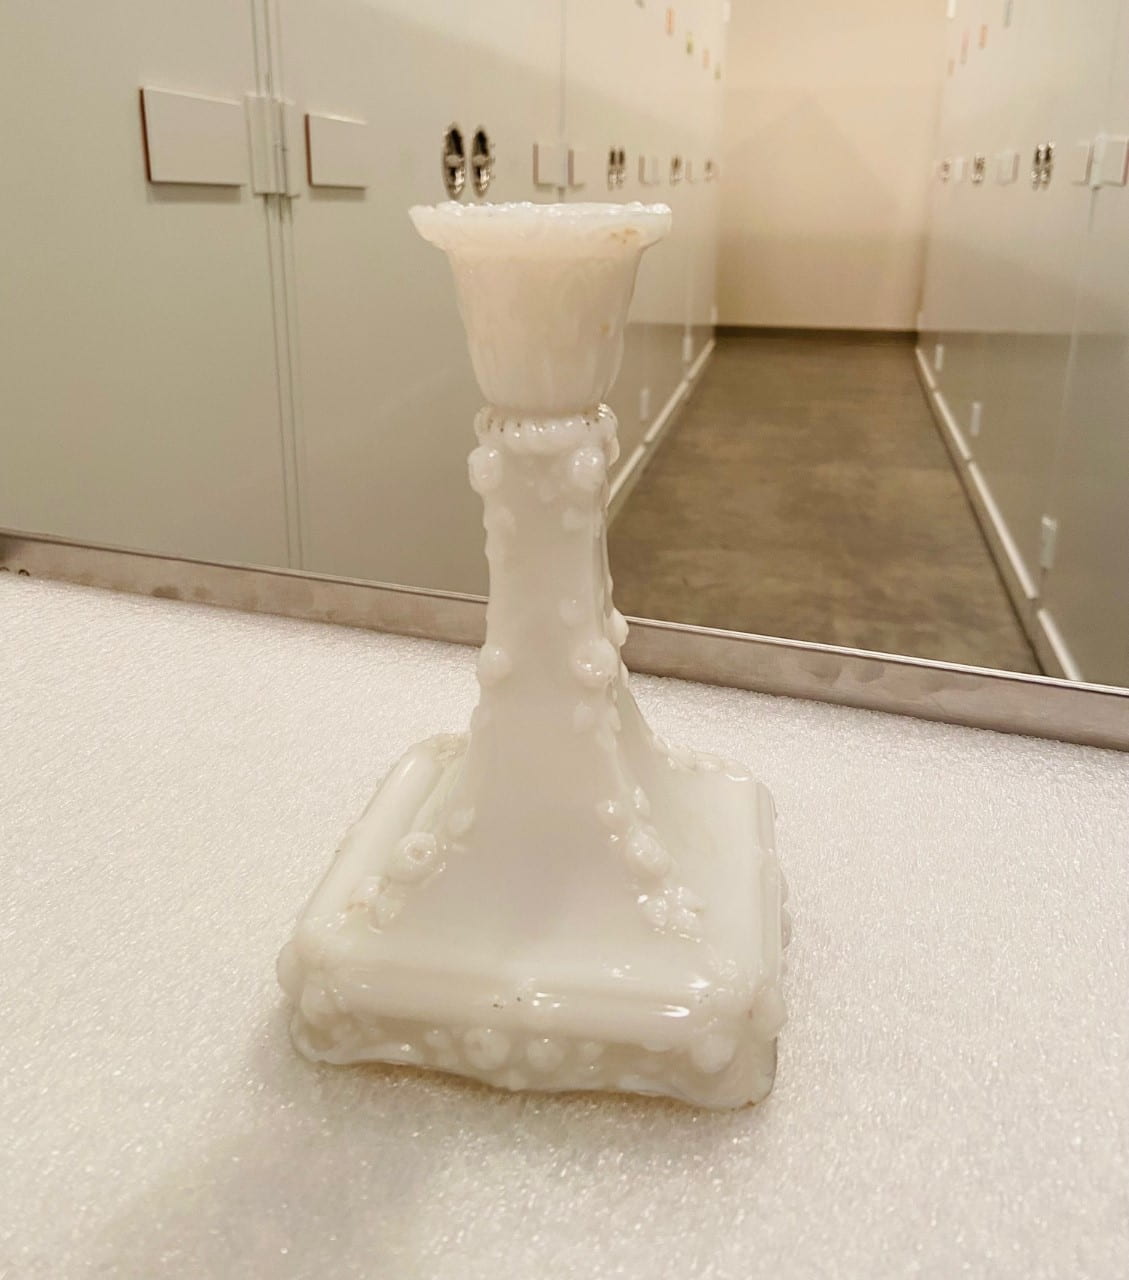 A decorative white glass candlestick on a white surface with cabinets in the background.